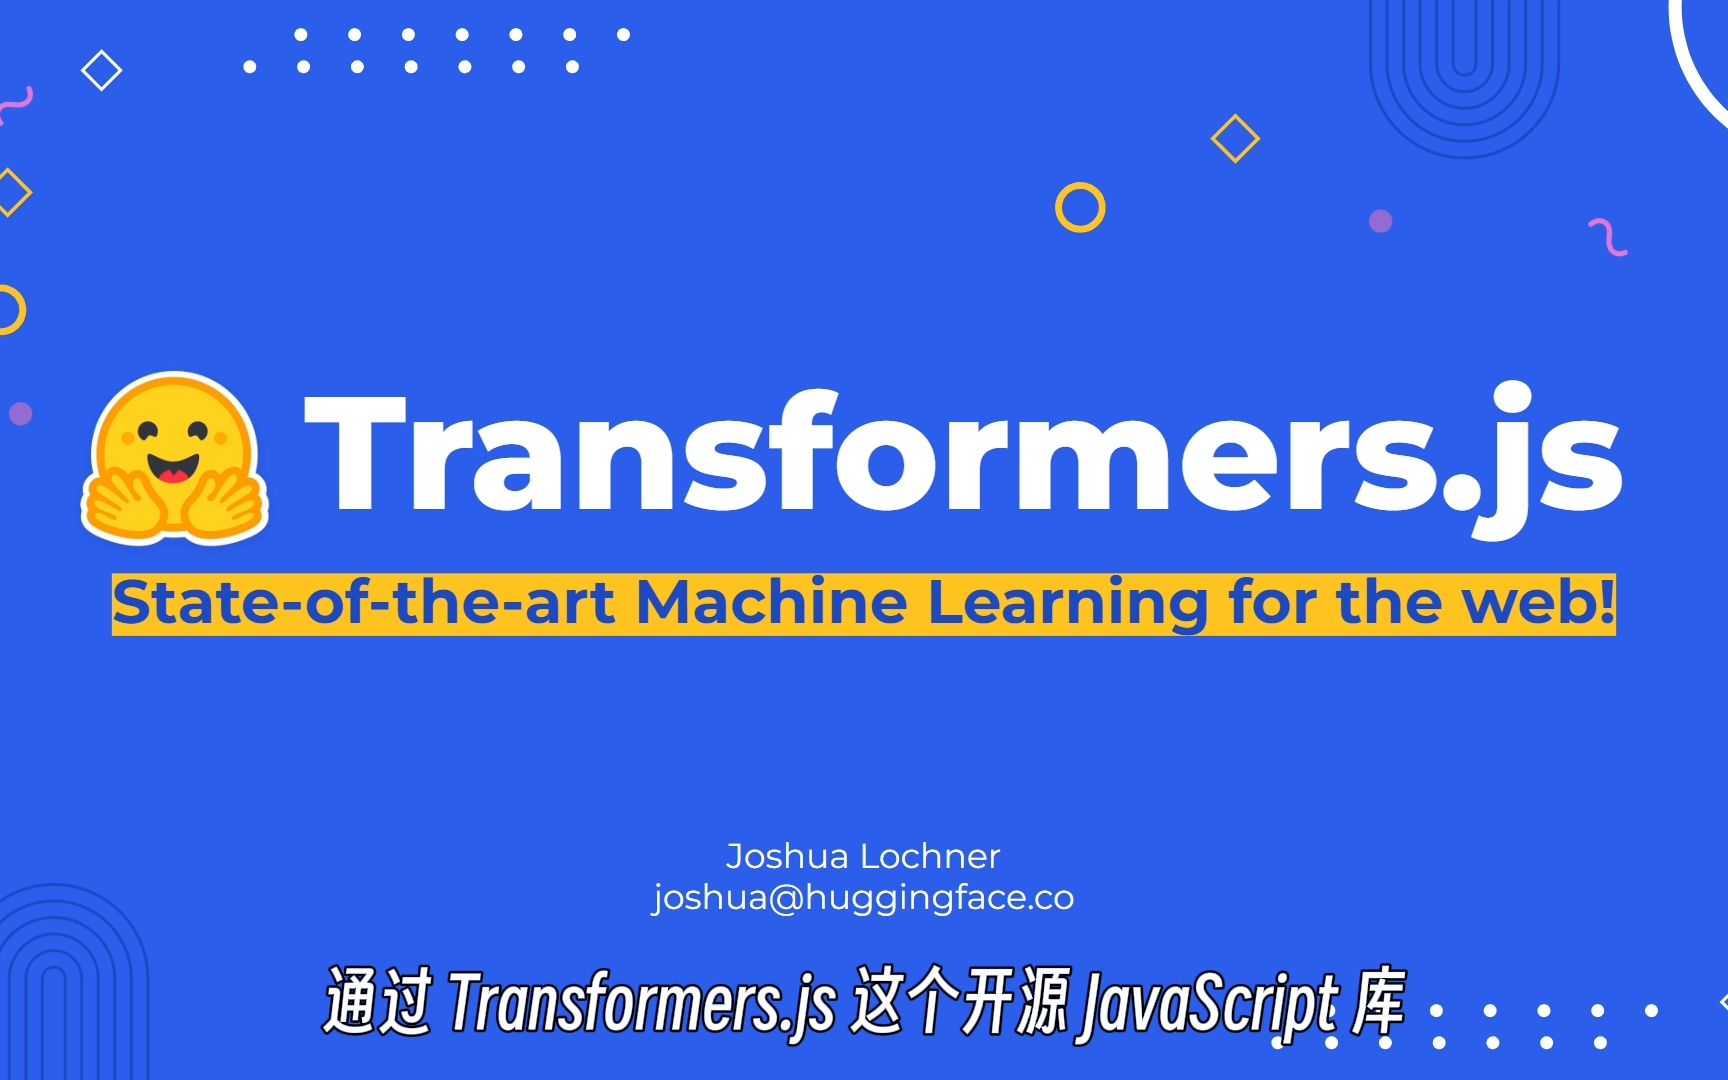 〖FEDAY〗Transformers.js: State-of-t State-of-the-art Machine Learning for the Web